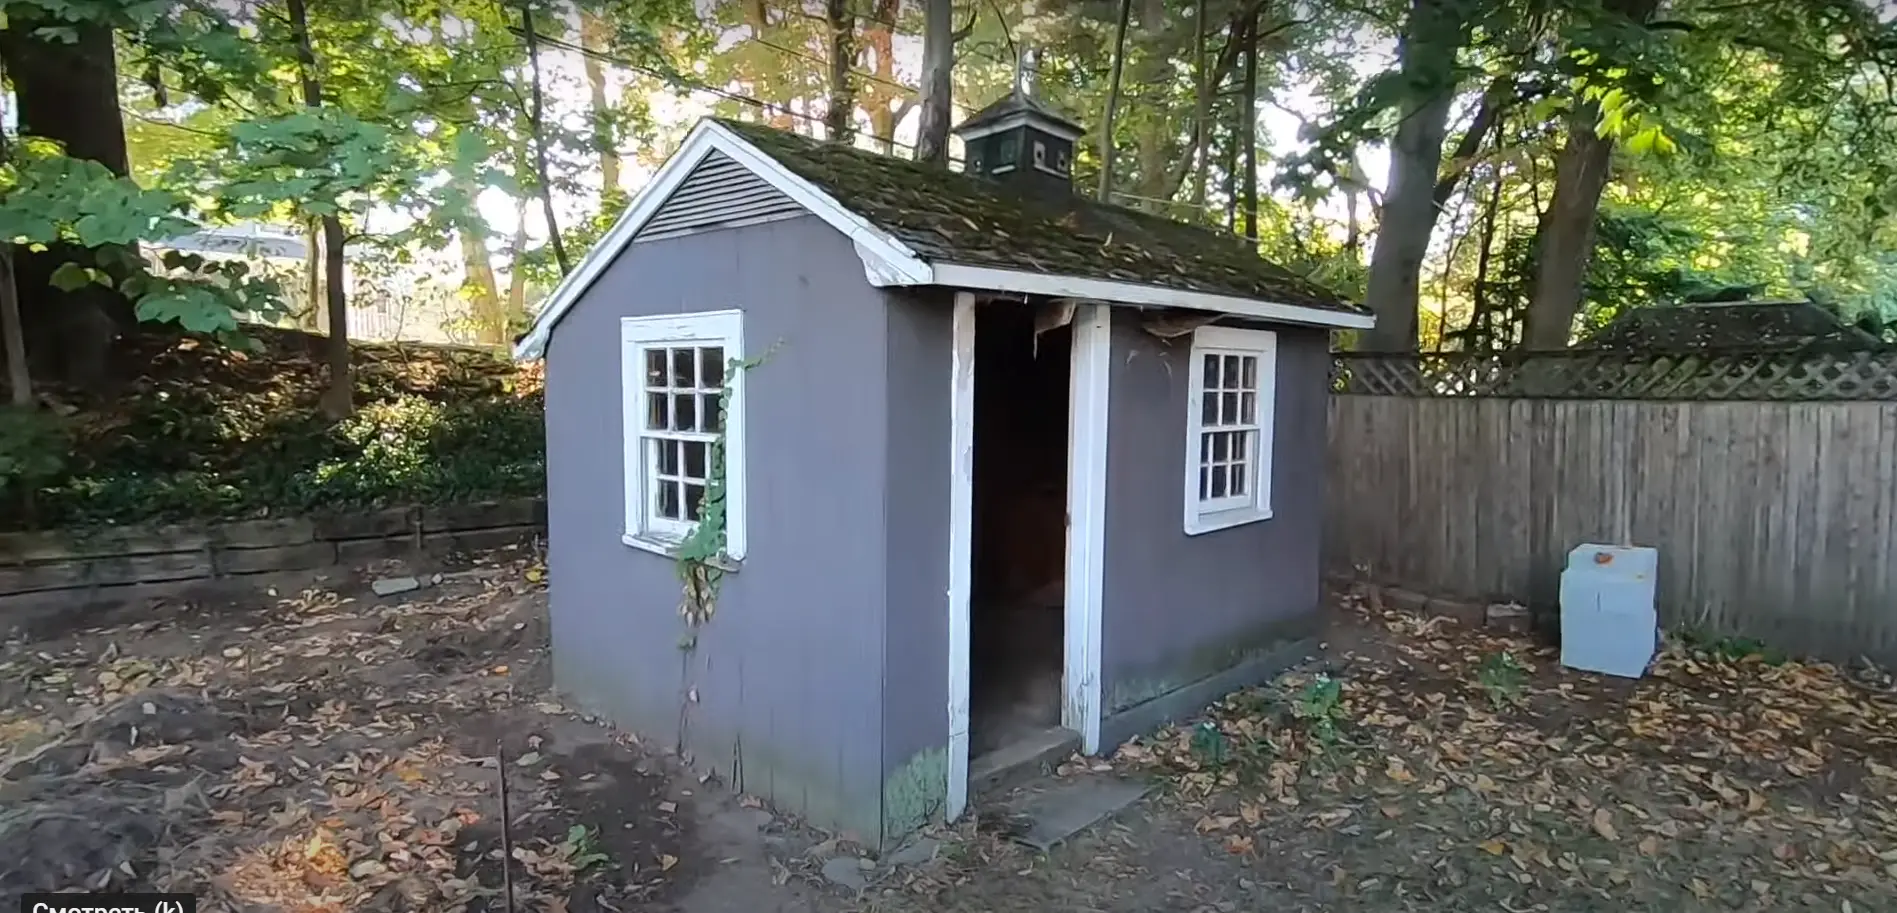 Why Would You Tear Down a Shed?